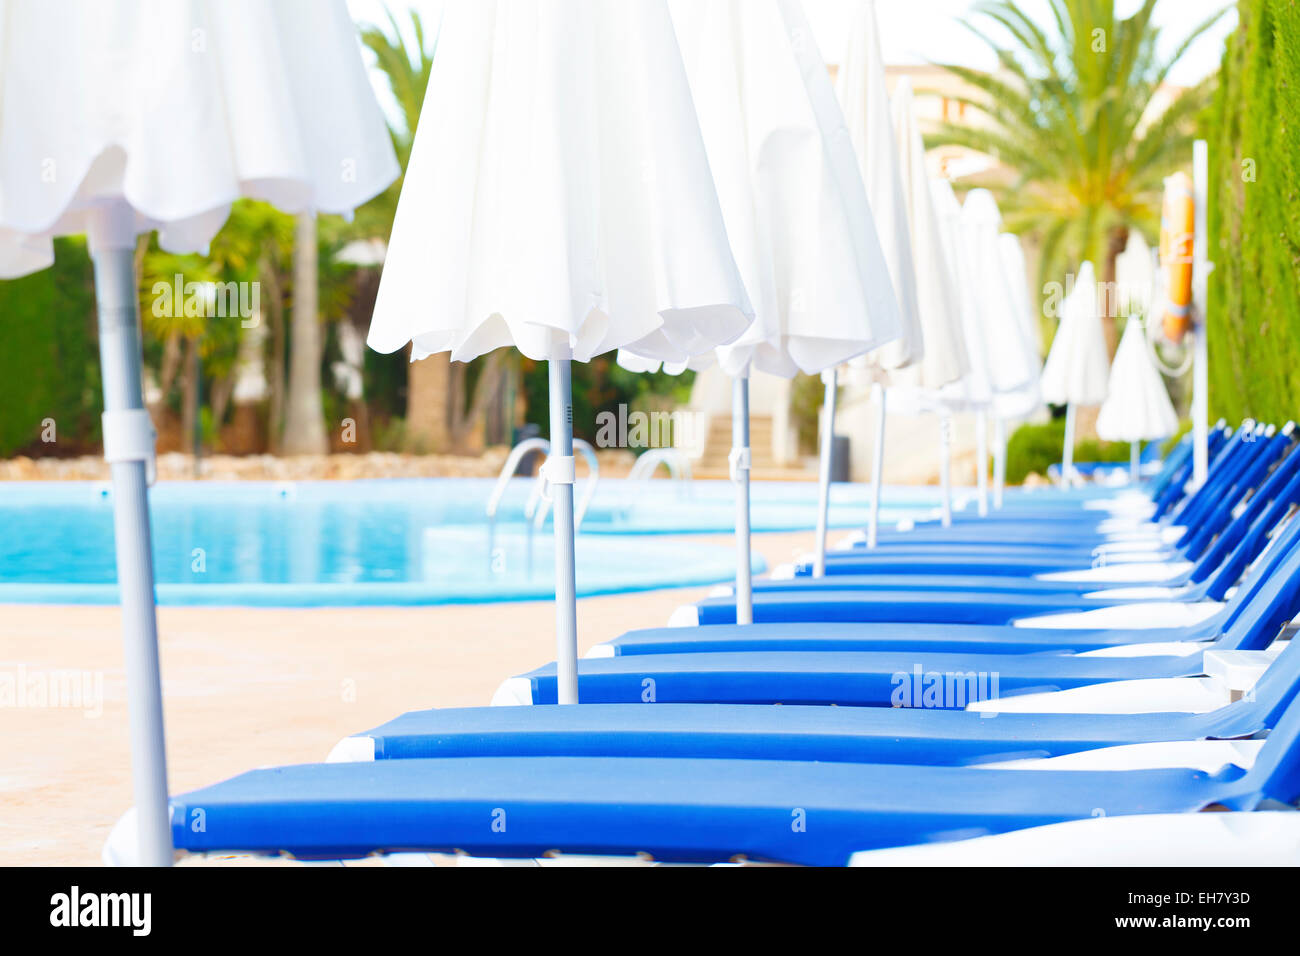 Sunloungers and parasols in a row Stock Photo